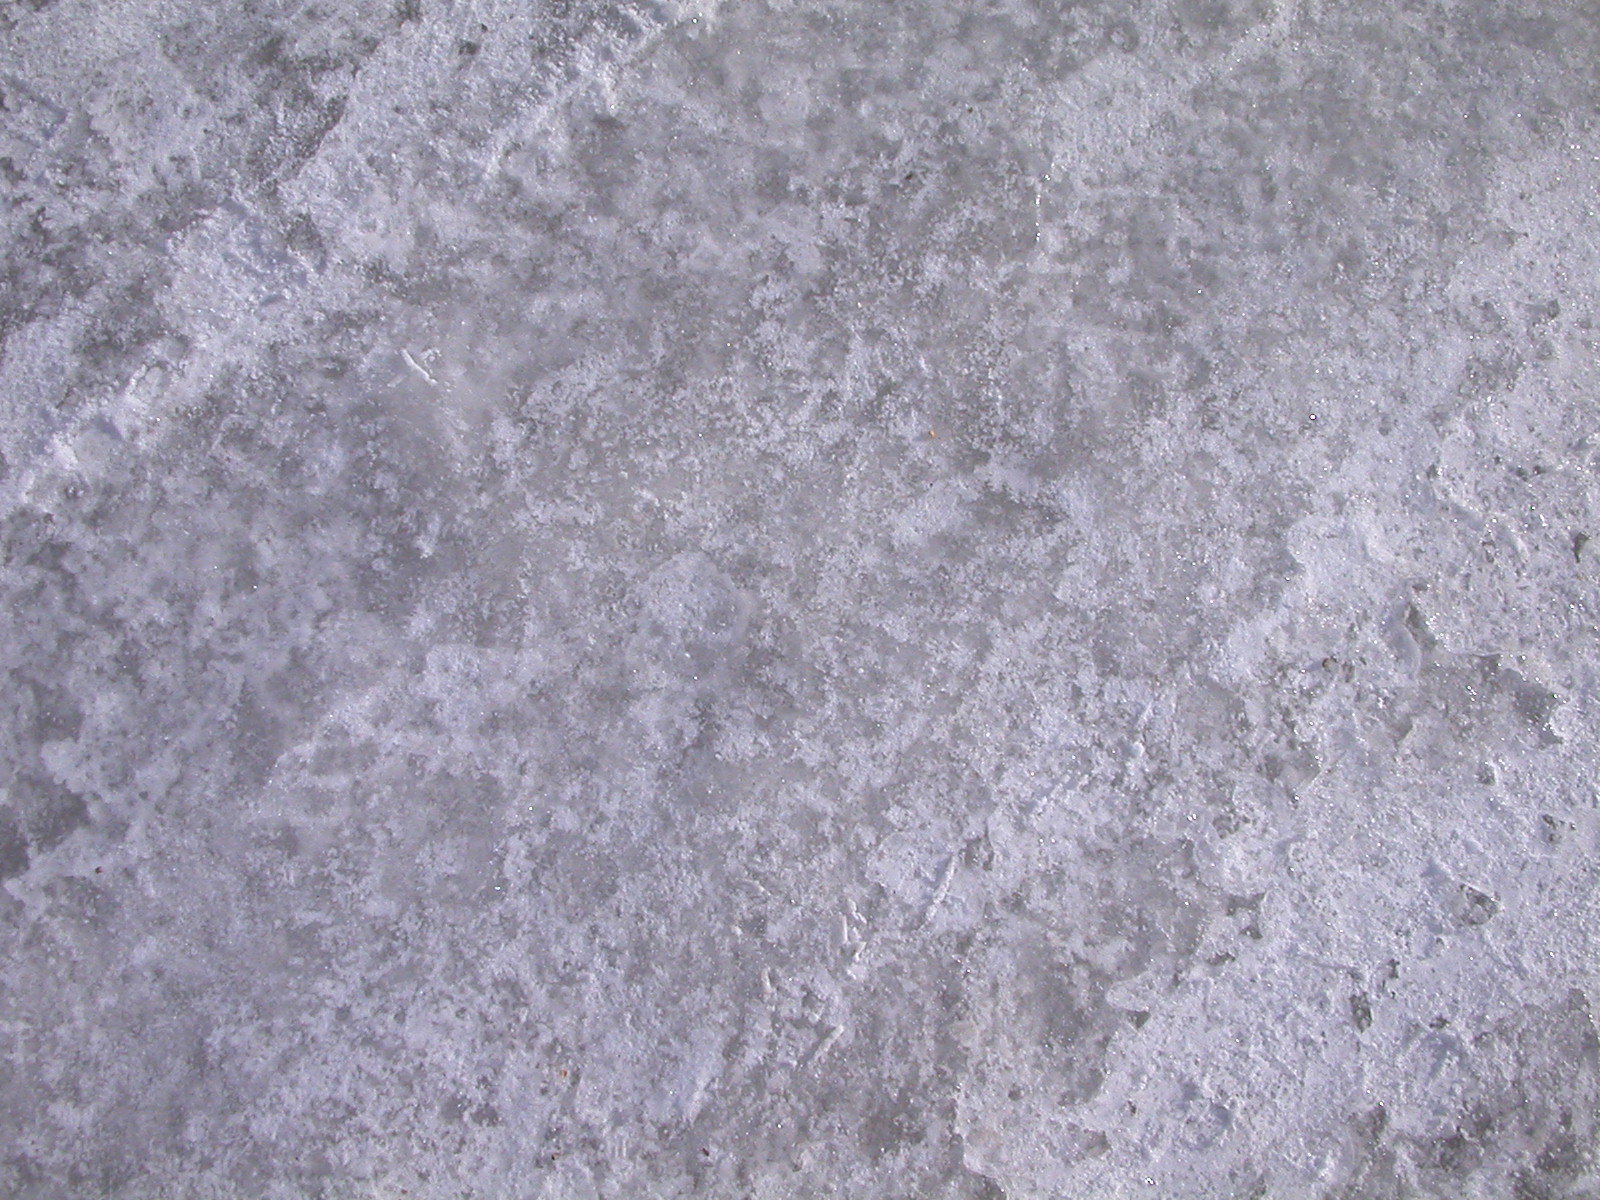 a close up image of gray and white cement